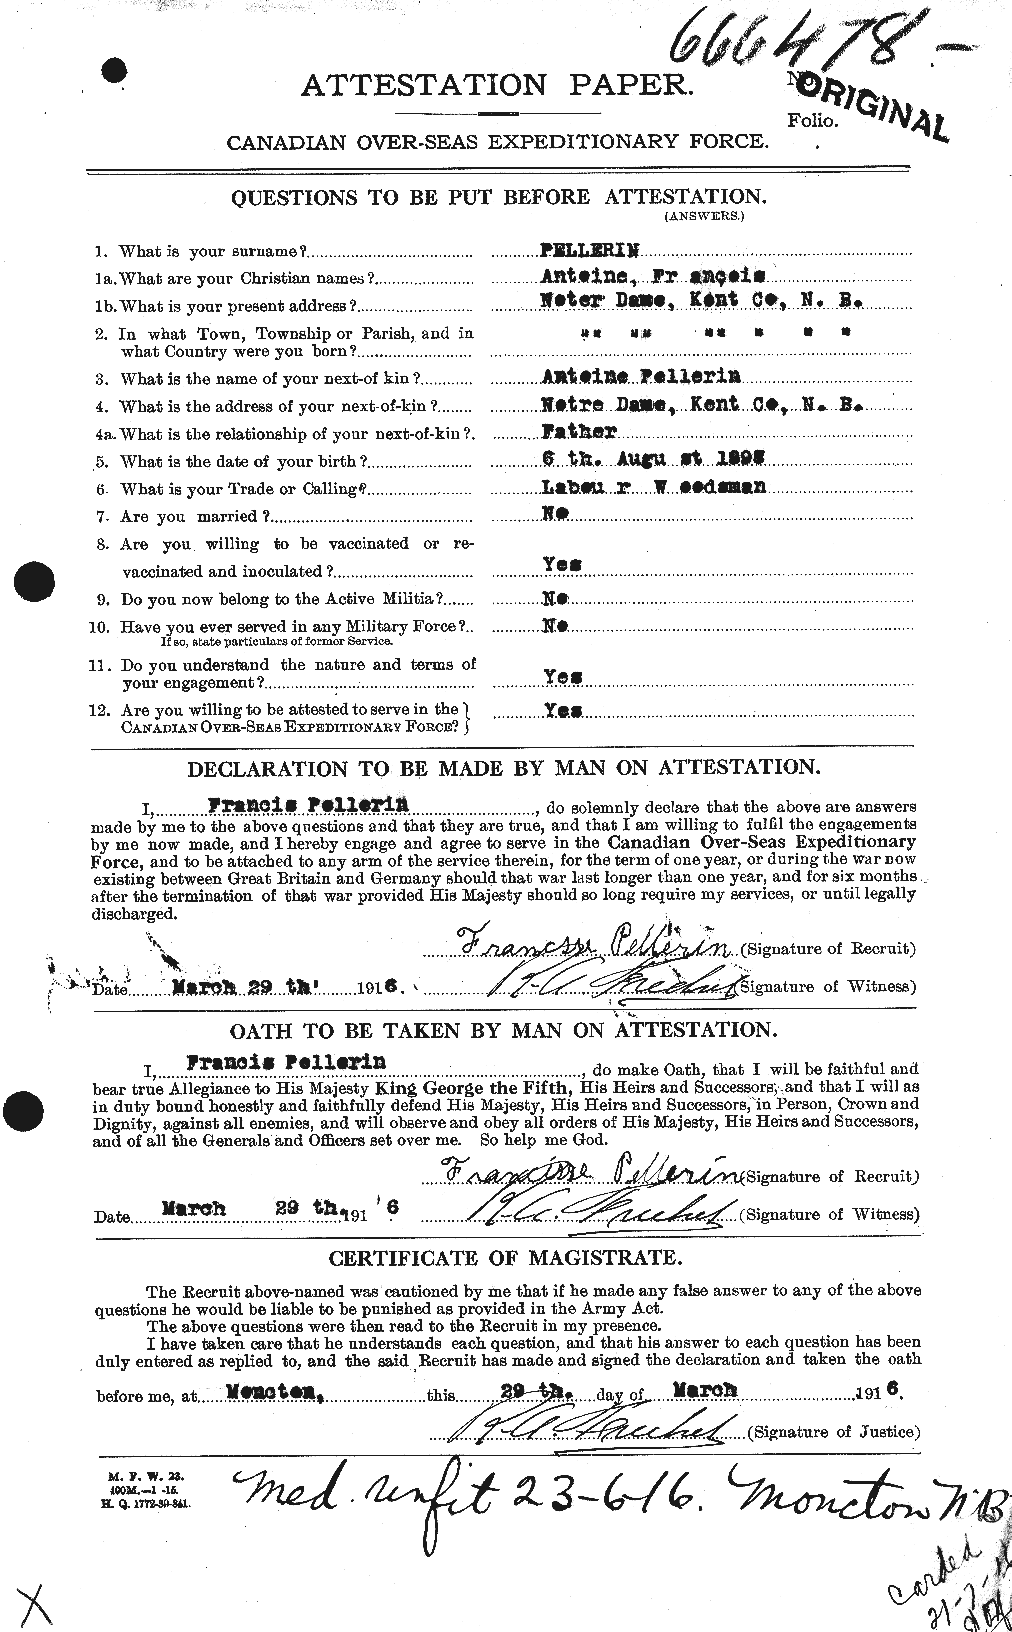 Personnel Records of the First World War - CEF 572234a